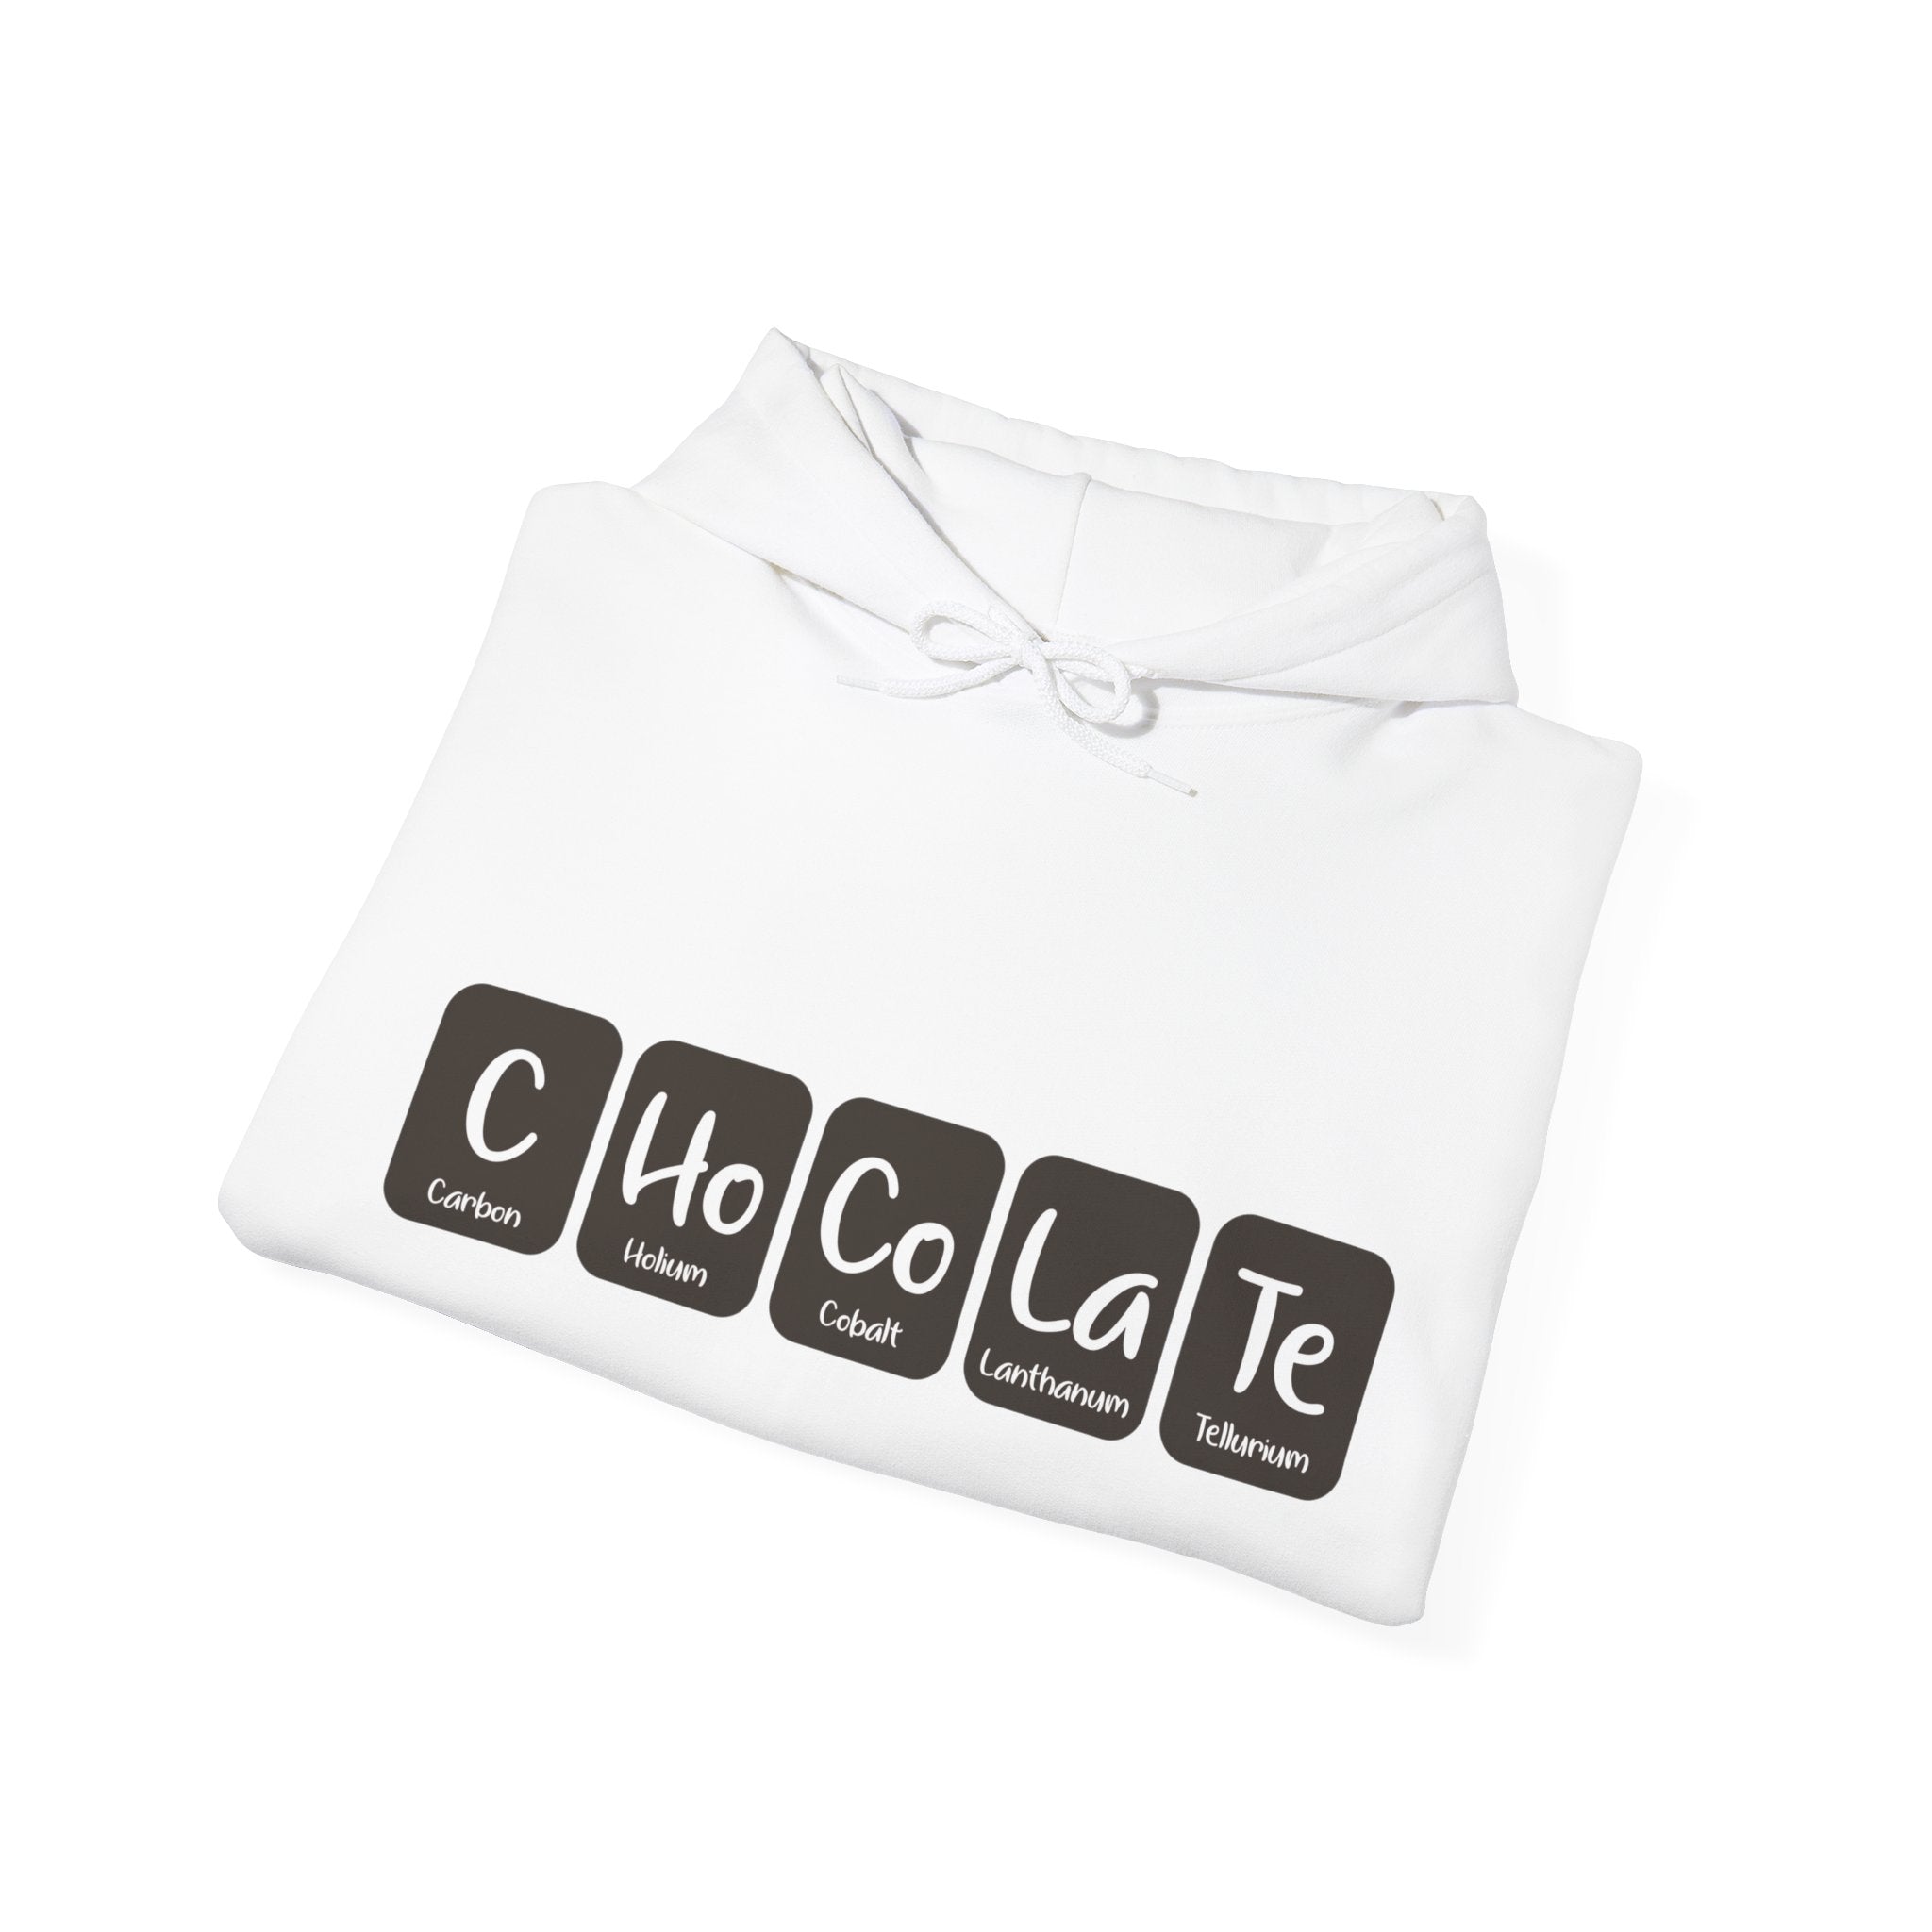 Fashion-forward C-Ho-Co-La-Te - Hooded Sweatshirt featuring a unique design, where the word "CHOCOLATE" is cleverly spelled out using chemical element symbols from the periodic table.